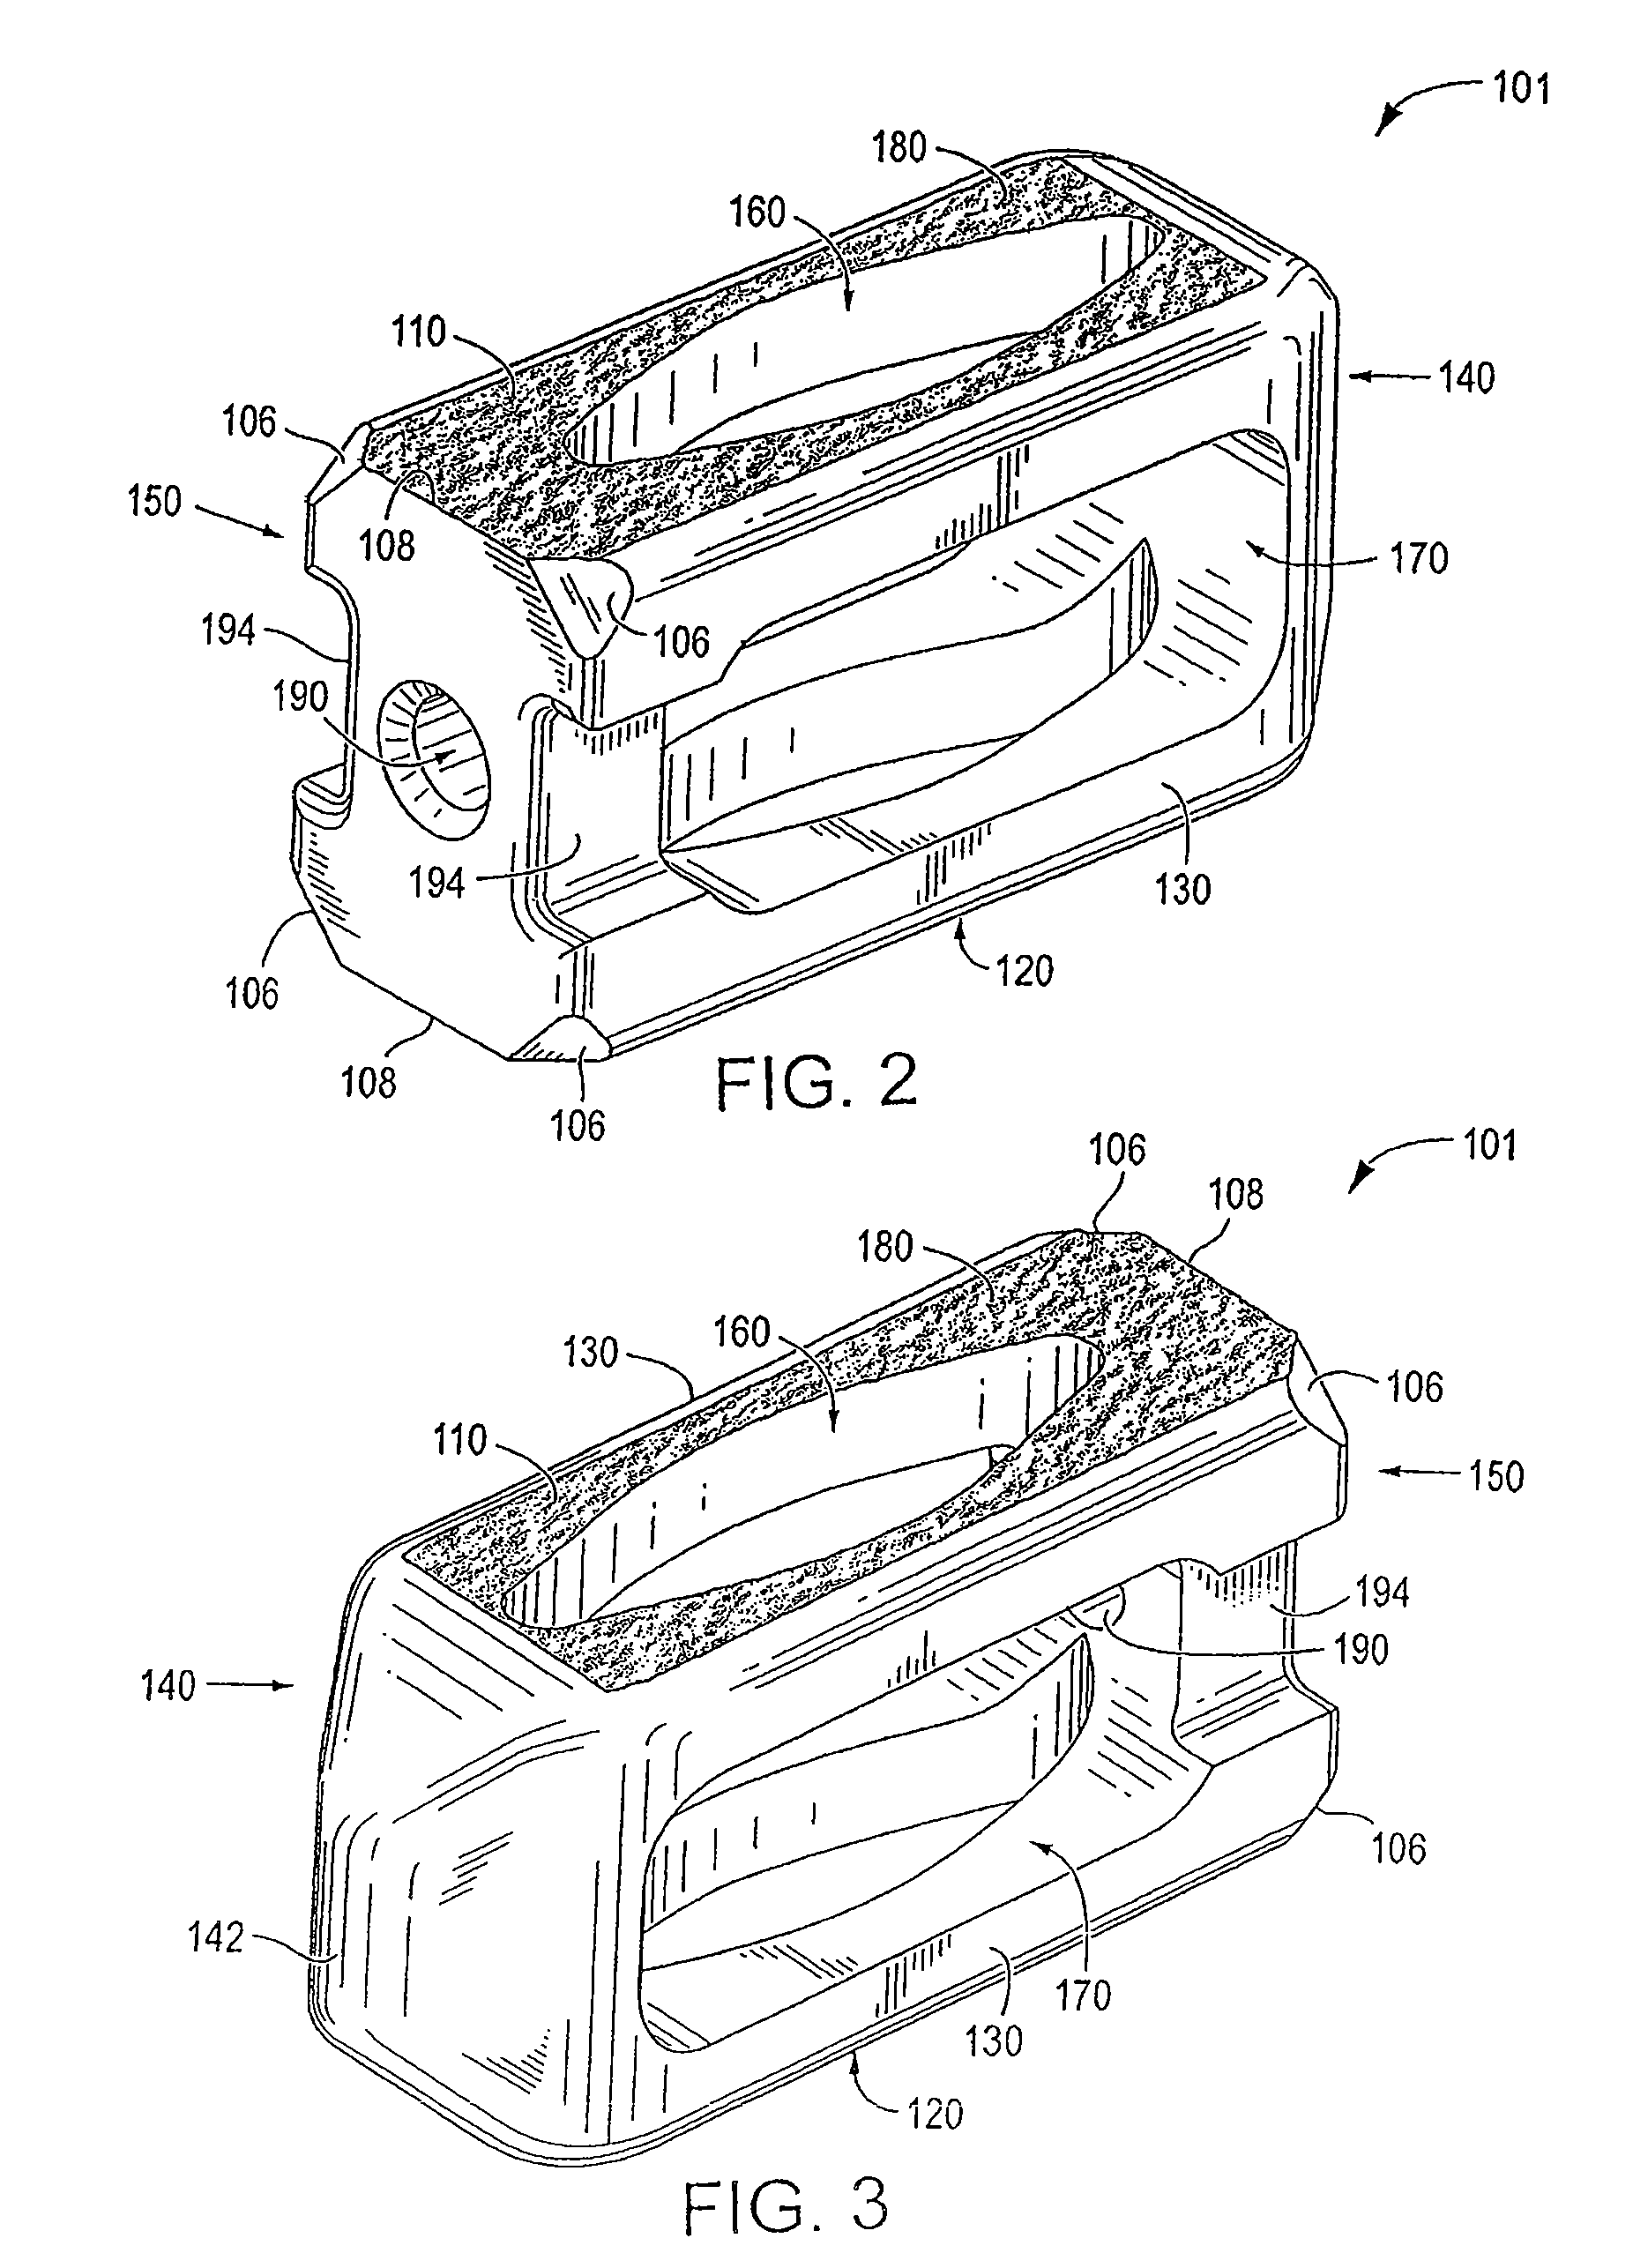 Spinal implant and integration plate for optimizing vertebral endplate contact load-bearing edges